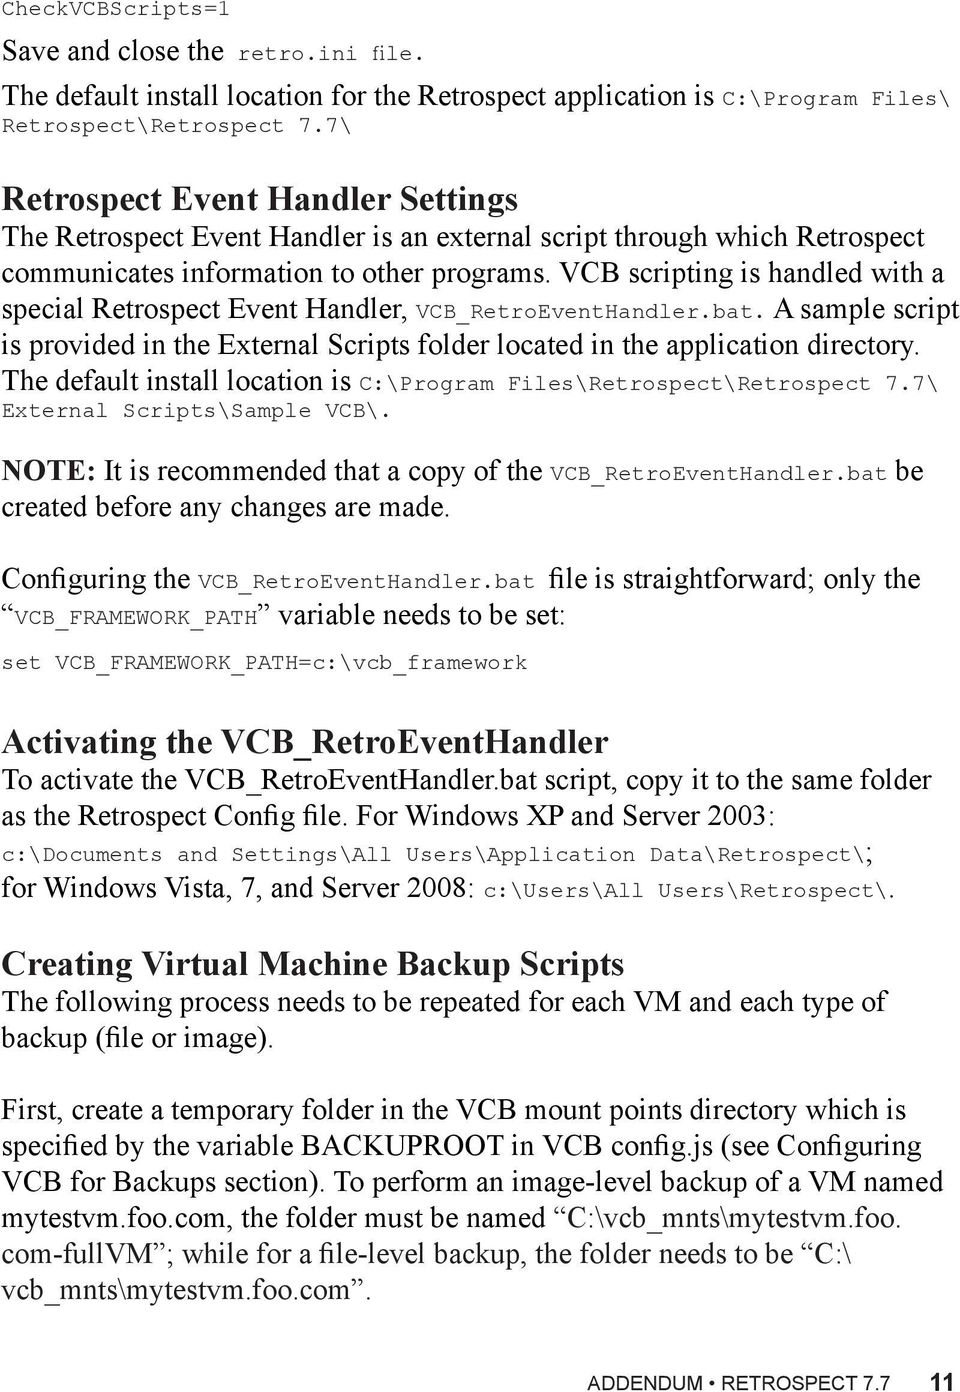 VCB scripting is handled with a special Retrospect Event Handler, VCB_RetroEventHandler.bat. A sample script is provided in the External Scripts folder located in the application directory.